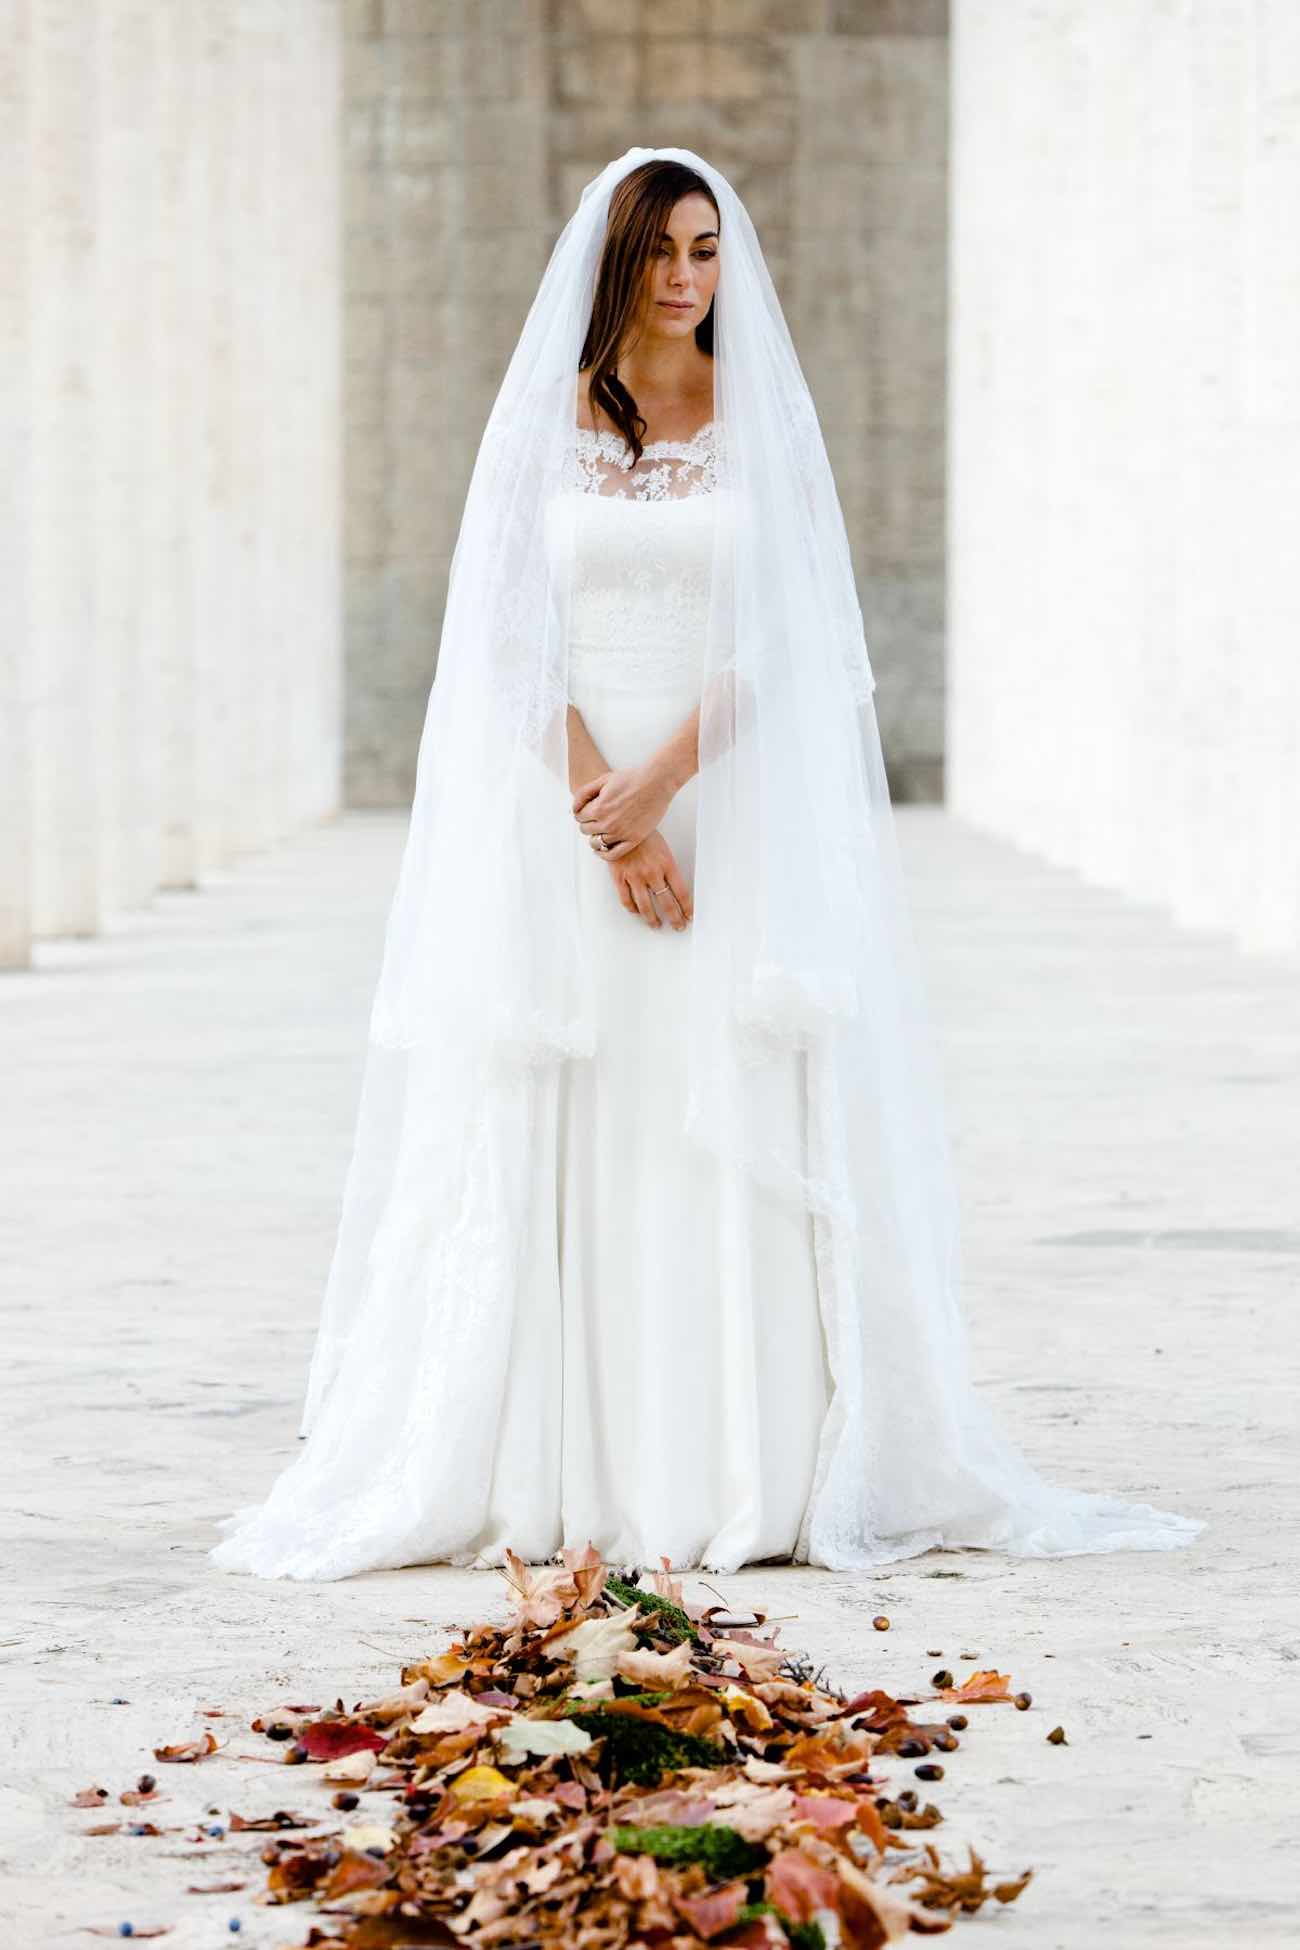 Marble & Romance in Rome, bridal shoot inspired by Caravaggio {Guido Caltabiano}